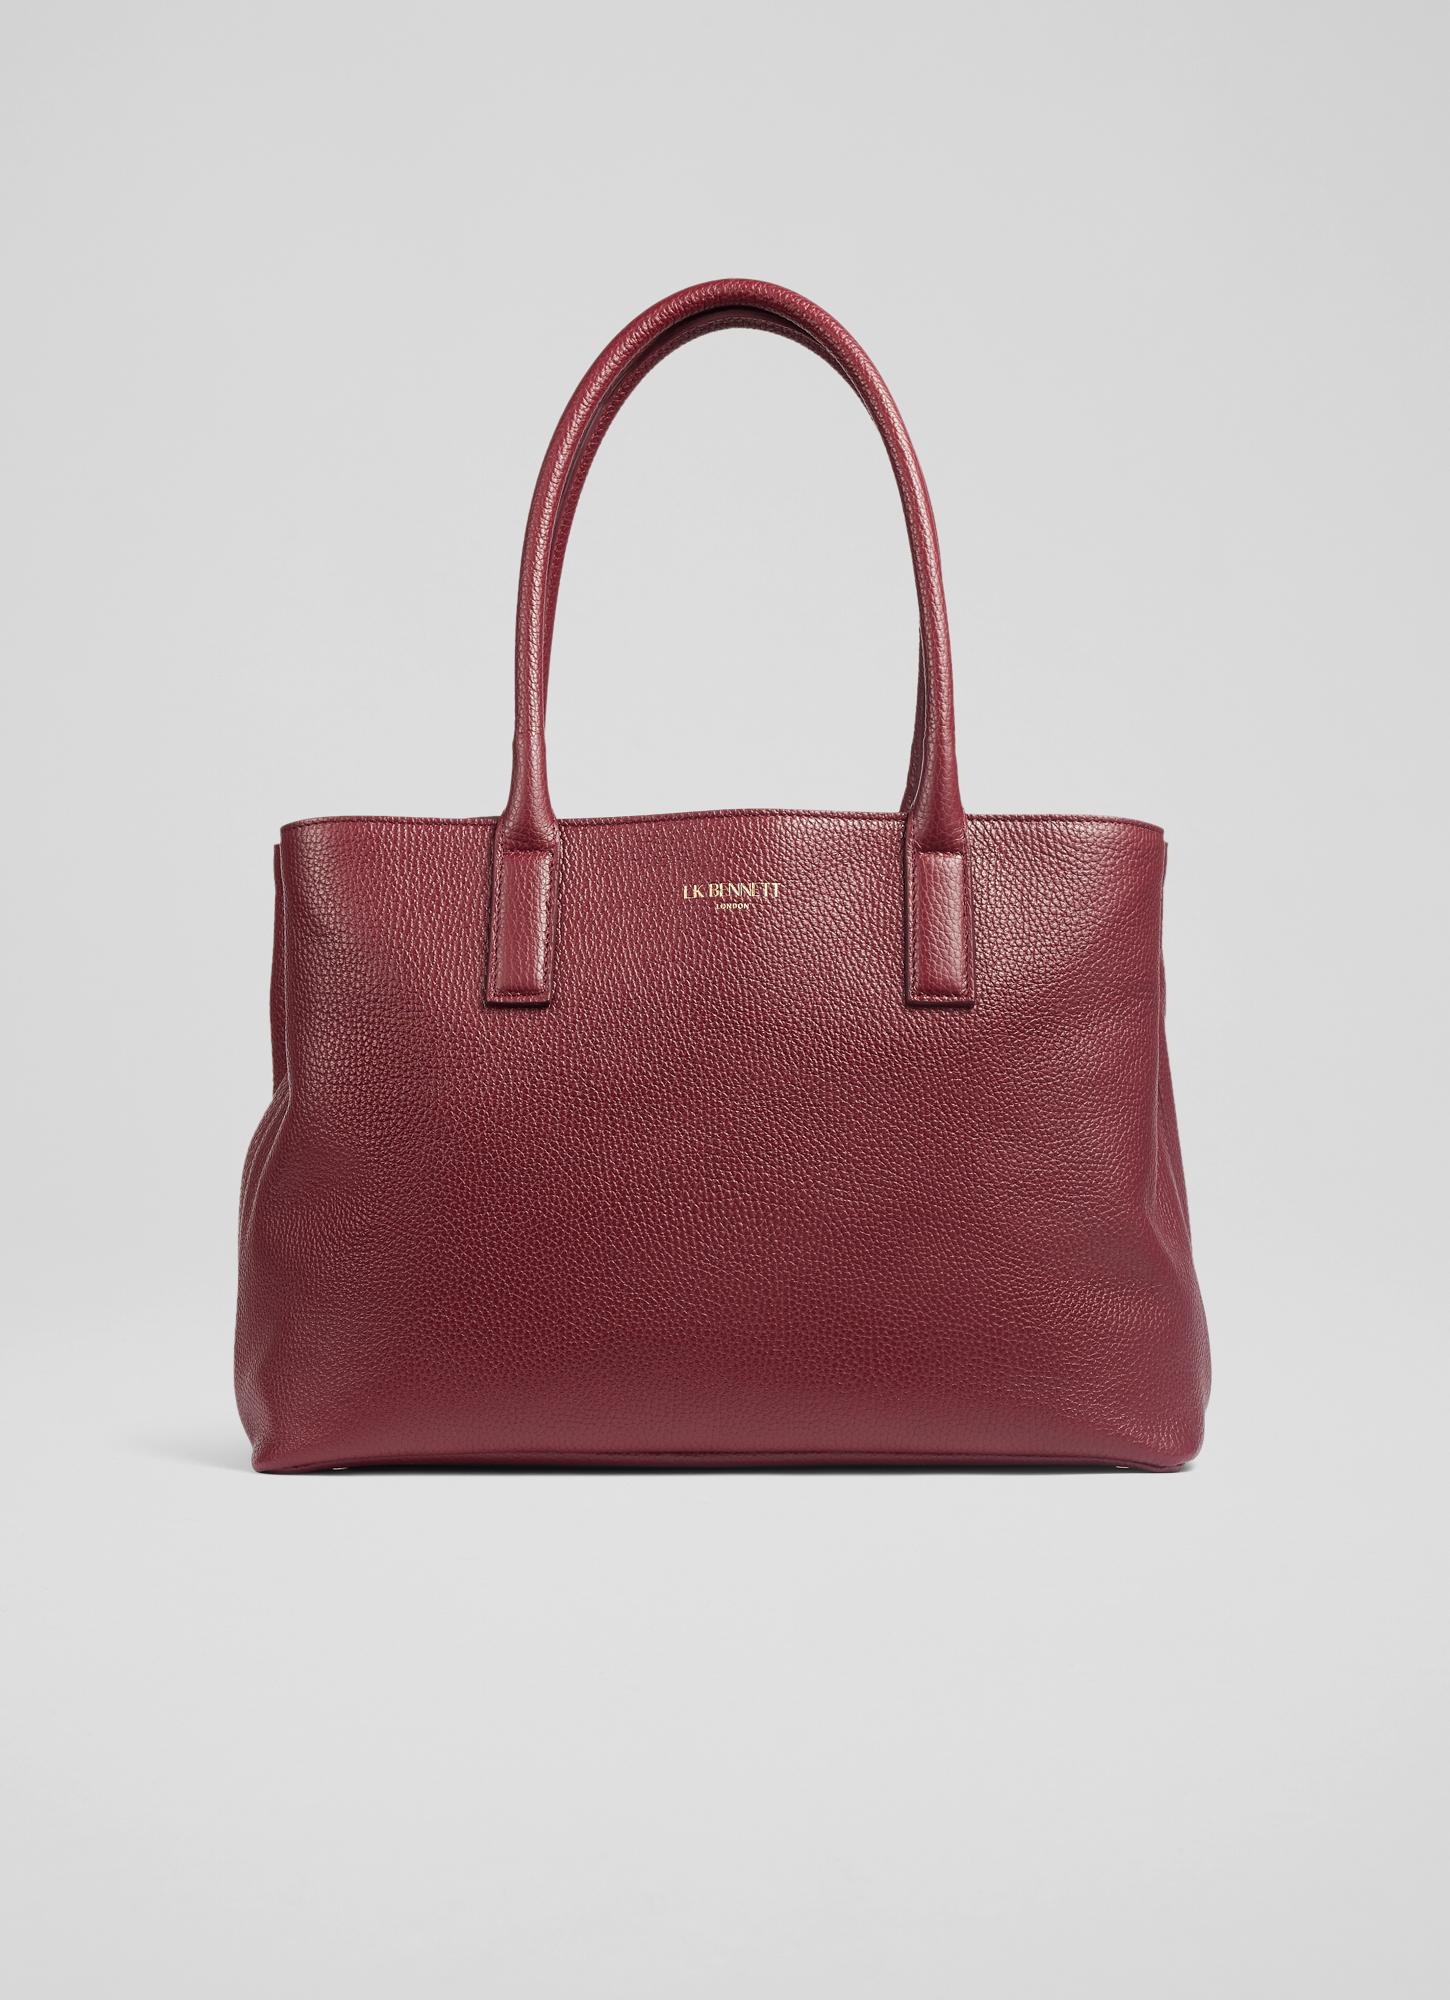 Lillian Burgundy Grainy Leather Tote Bag | Tote Bags | Handbags |  Collections | L.K.Bennett, London